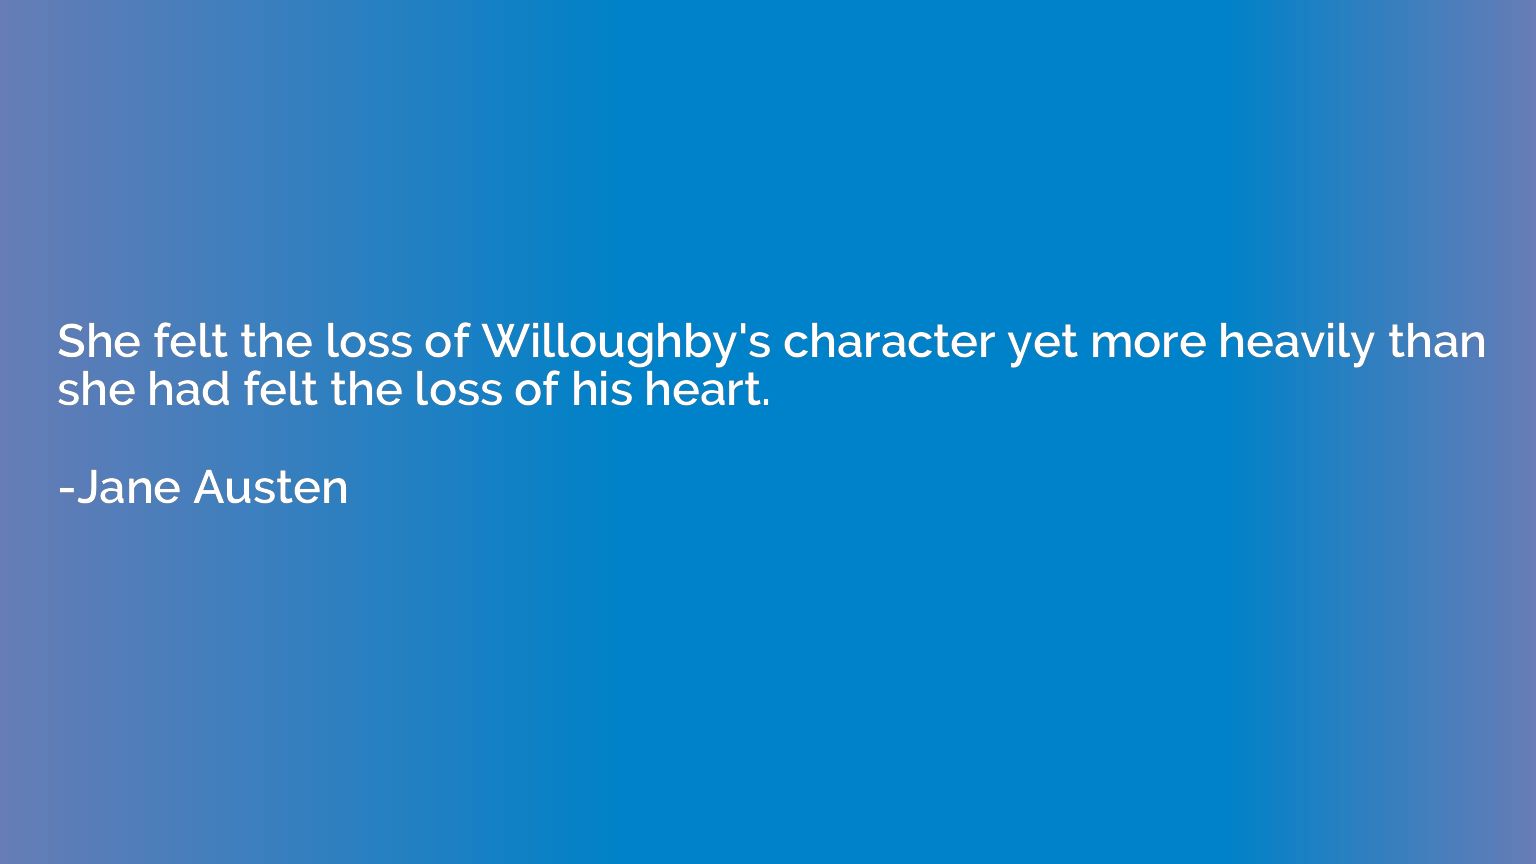 She felt the loss of Willoughby's character yet more heavily